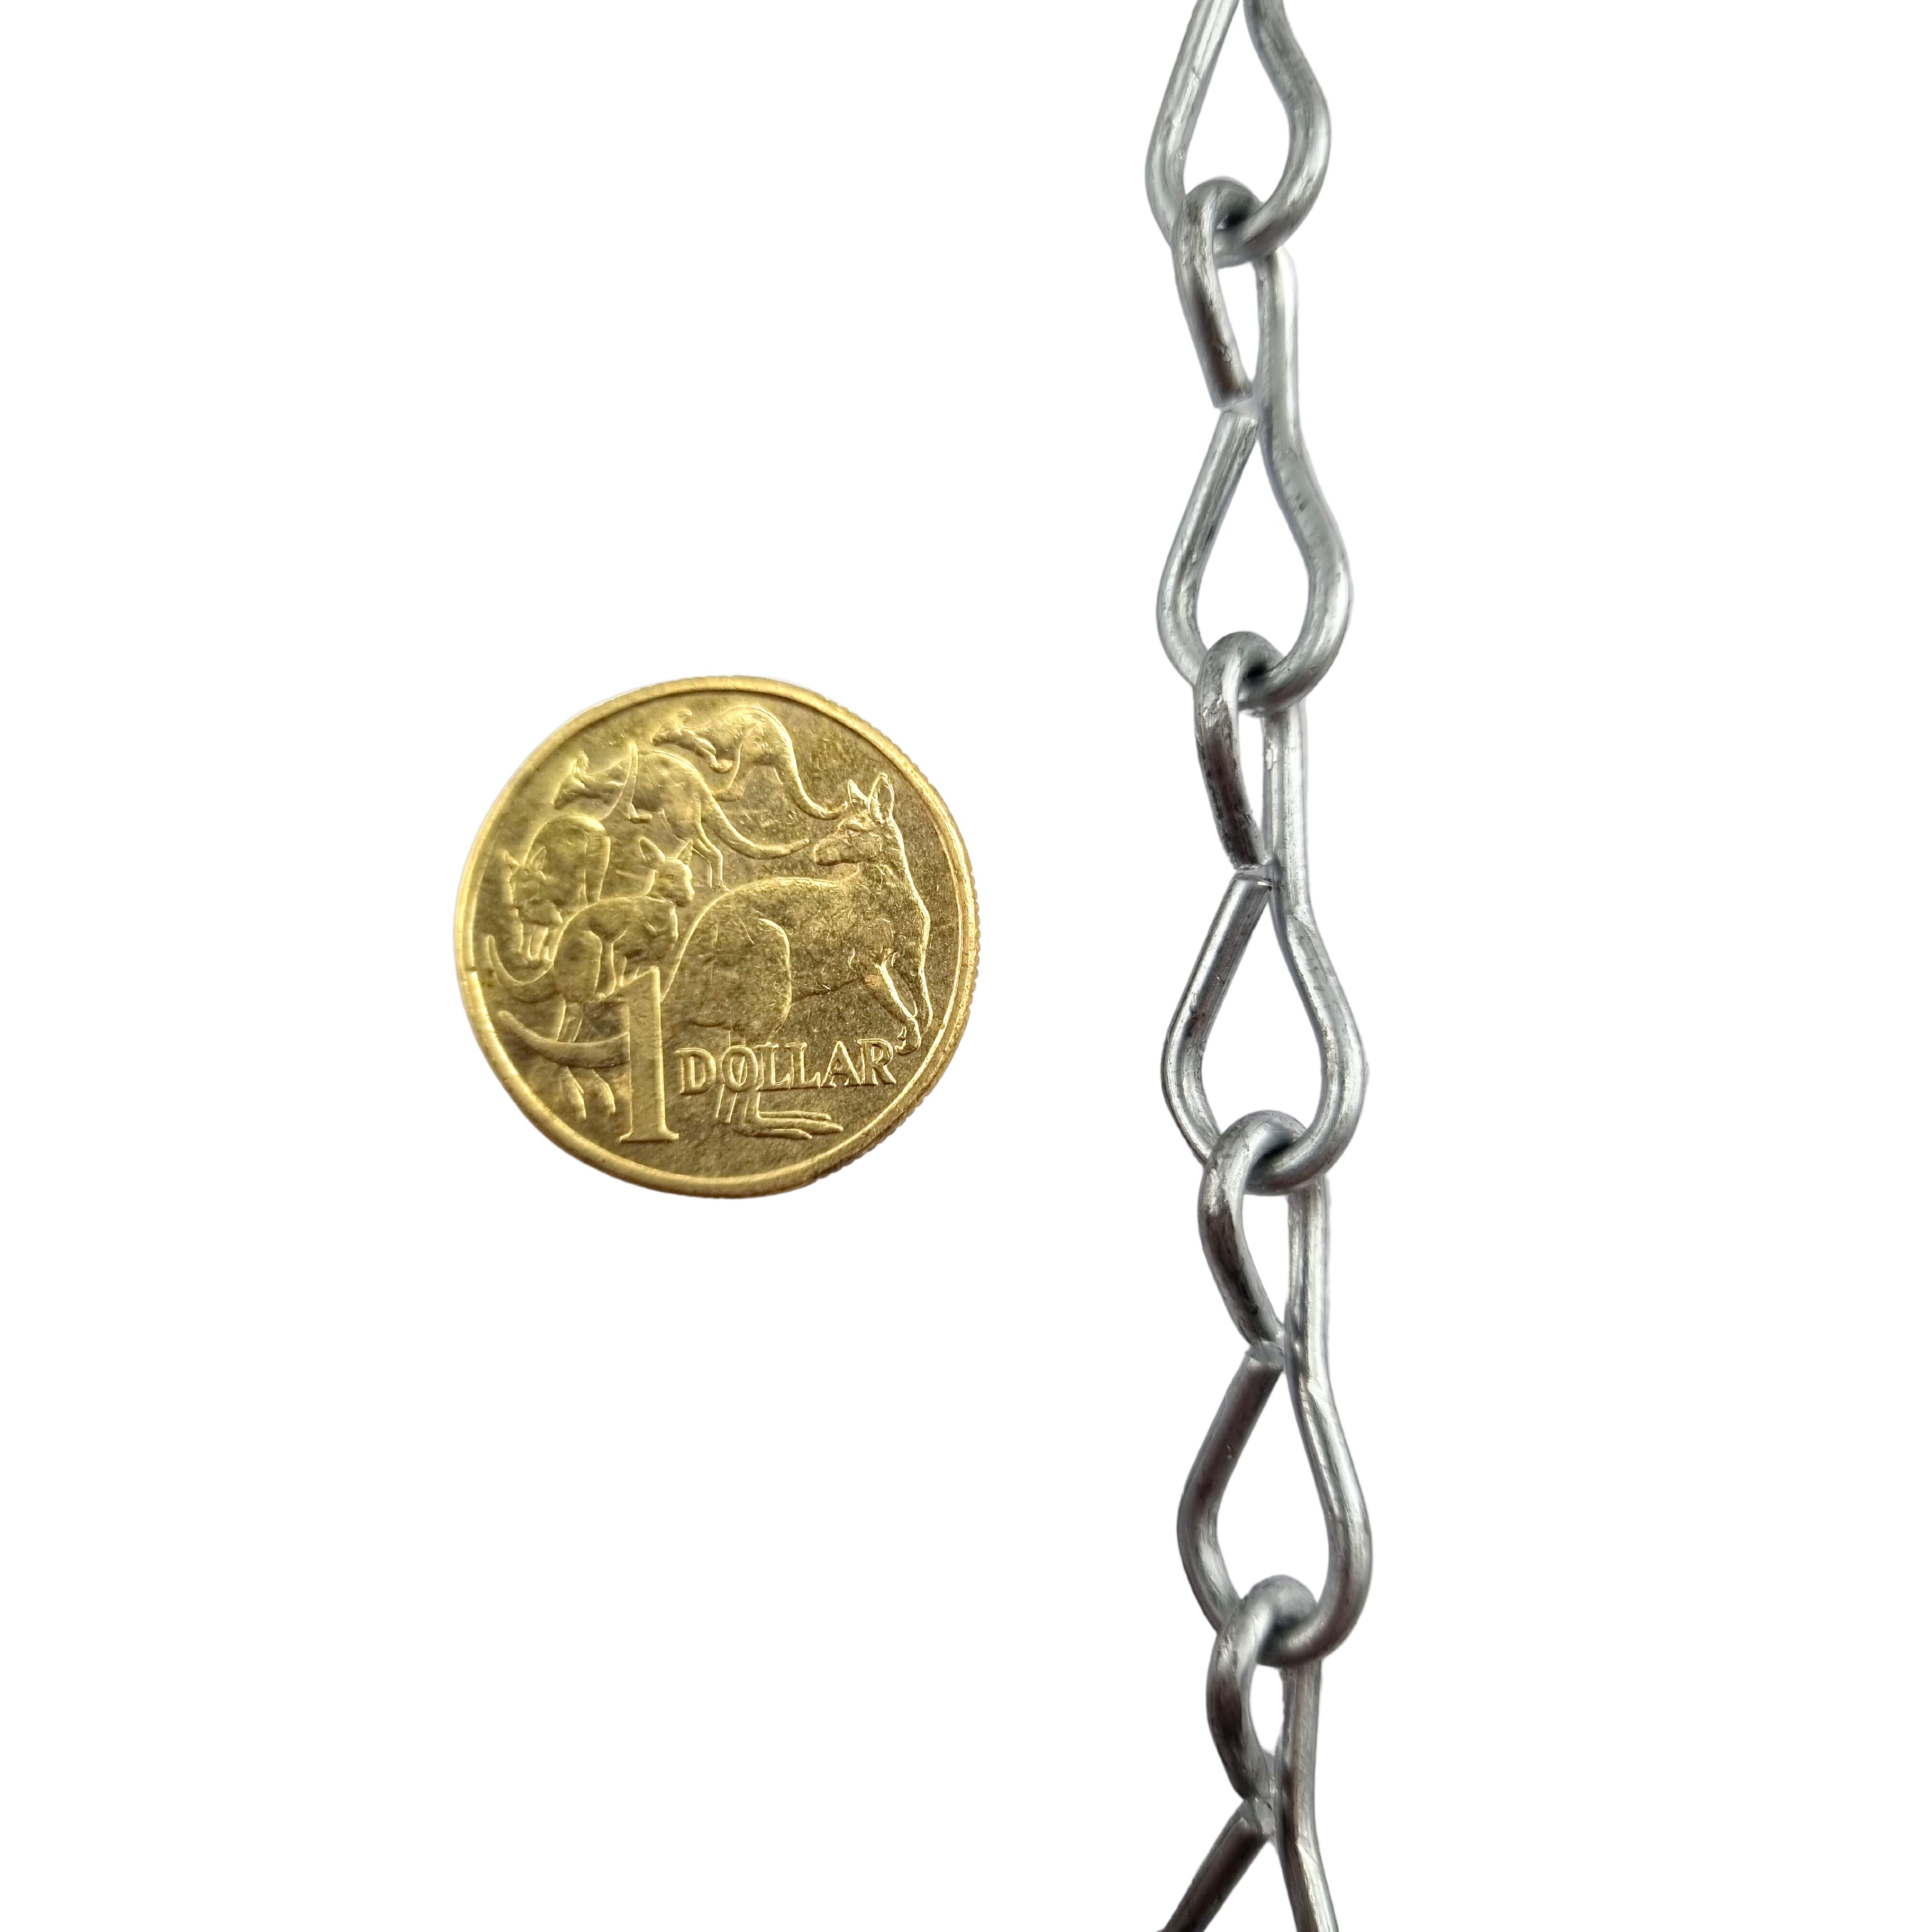 Australian made Single Jack Chain in galvanised finish, size 2mm and quantity of 200 metres. Melbourne, Australia.